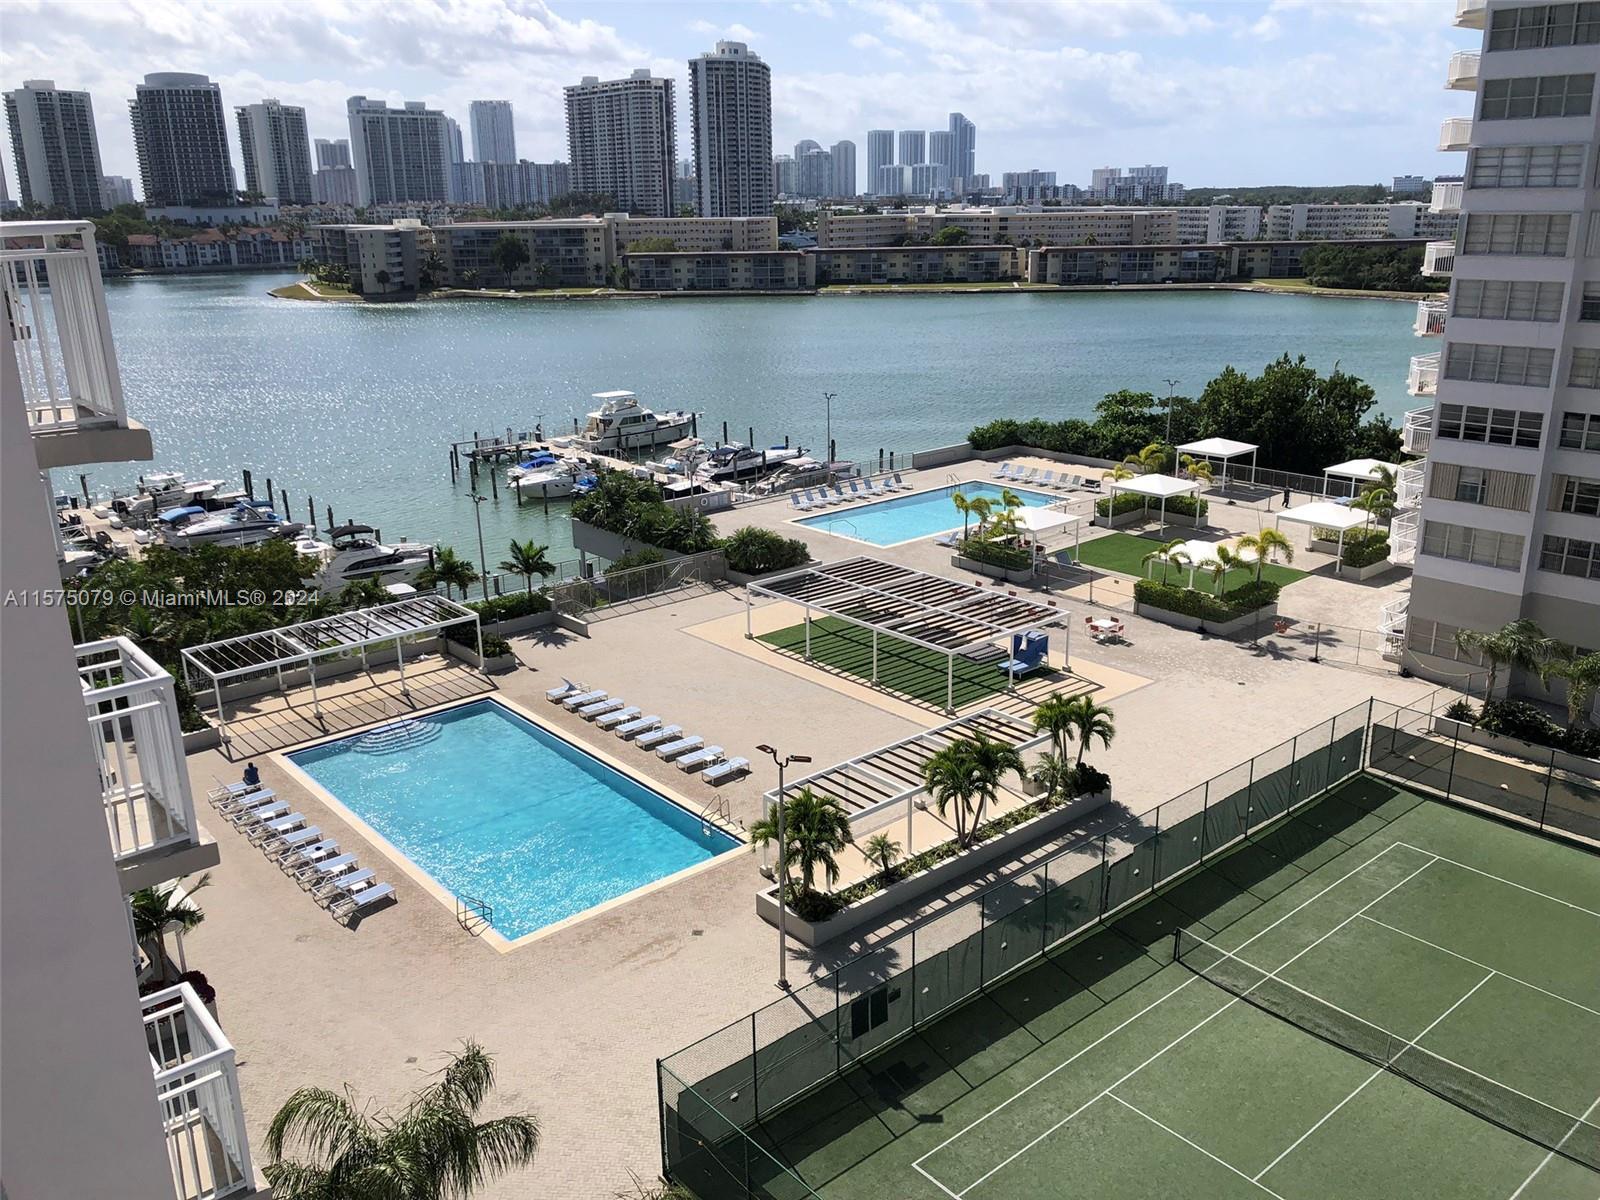 BEAUTIFUL 2 bedroom/2 bathroom WATERFRONT condo with HURRICANE IMPACT WINDOWS and upgrades throughou